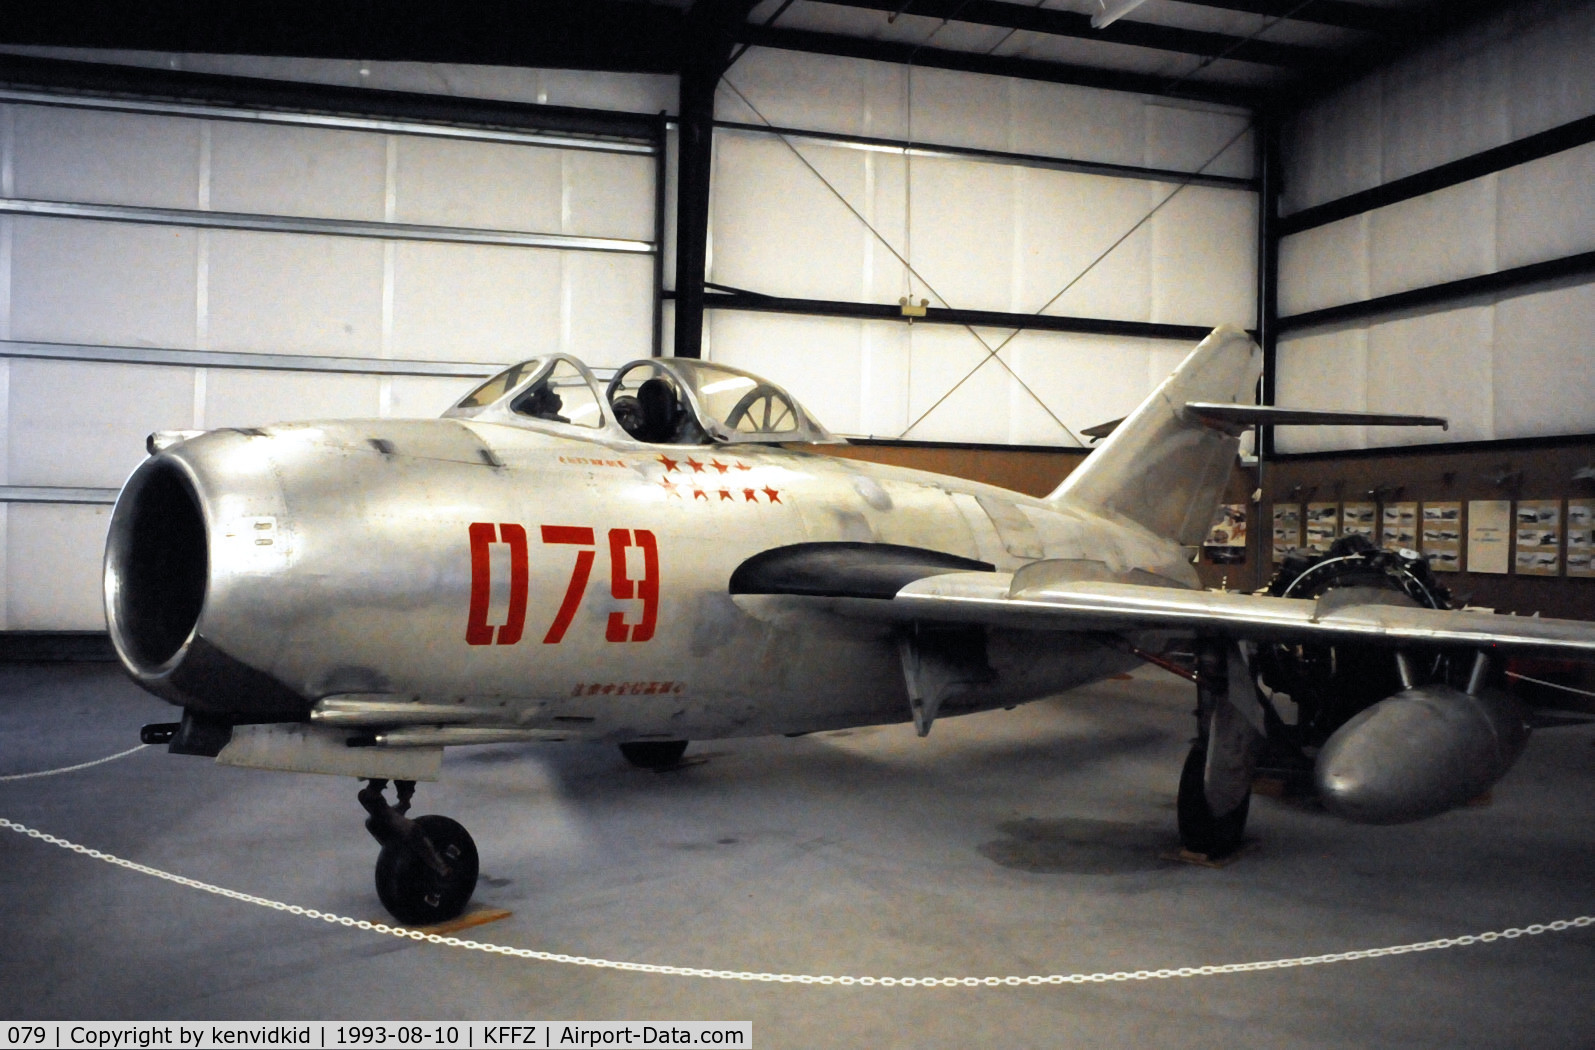 079, Mikoyan-Gurevich MiG-15 C/N 119079, At the Champlin Fighter Museum.